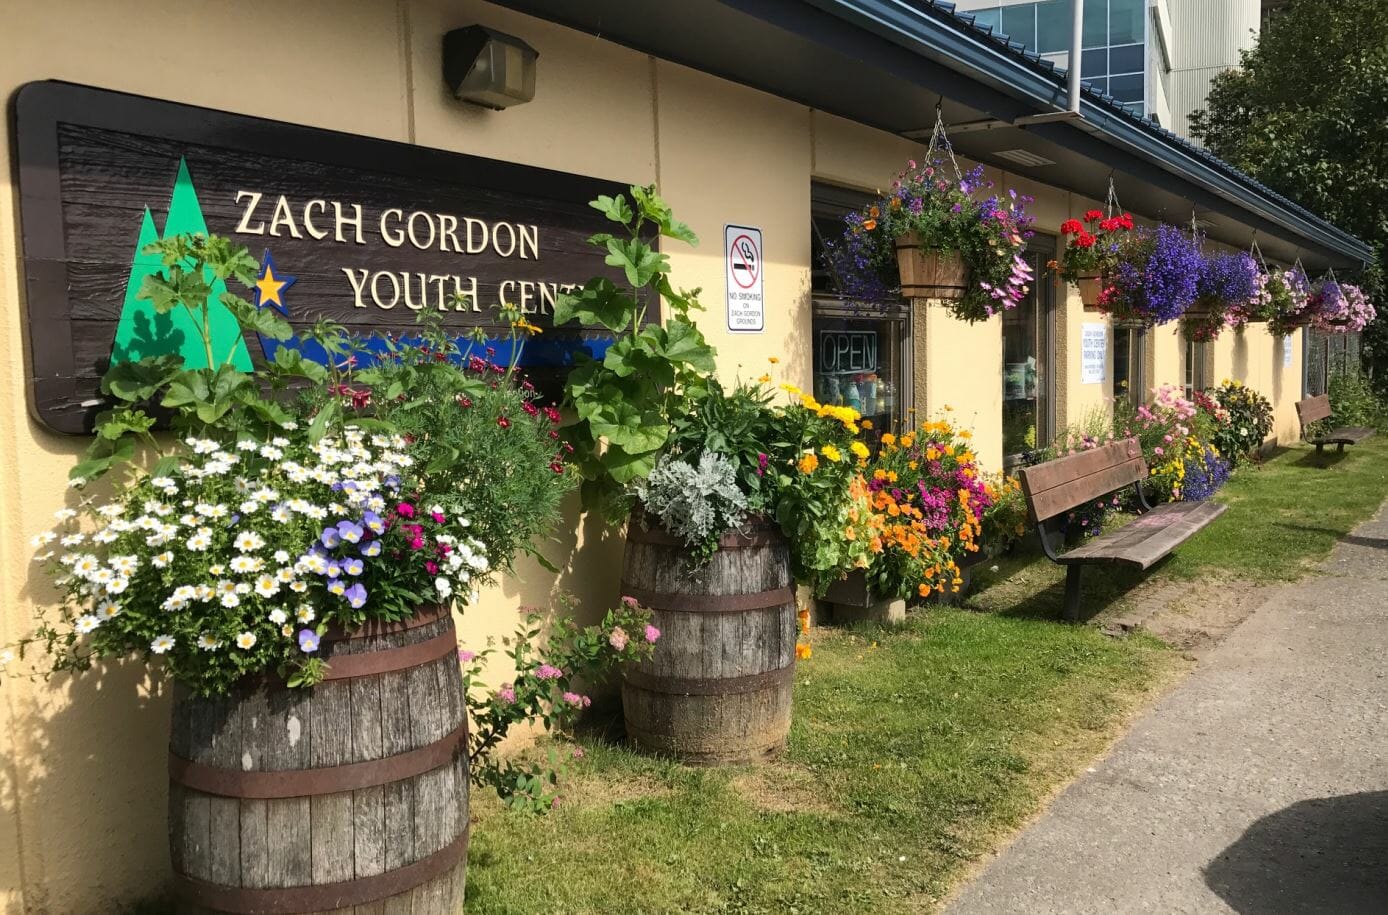 Angled view of Zach Gordon Youth Center with sign visible and flowers blooming